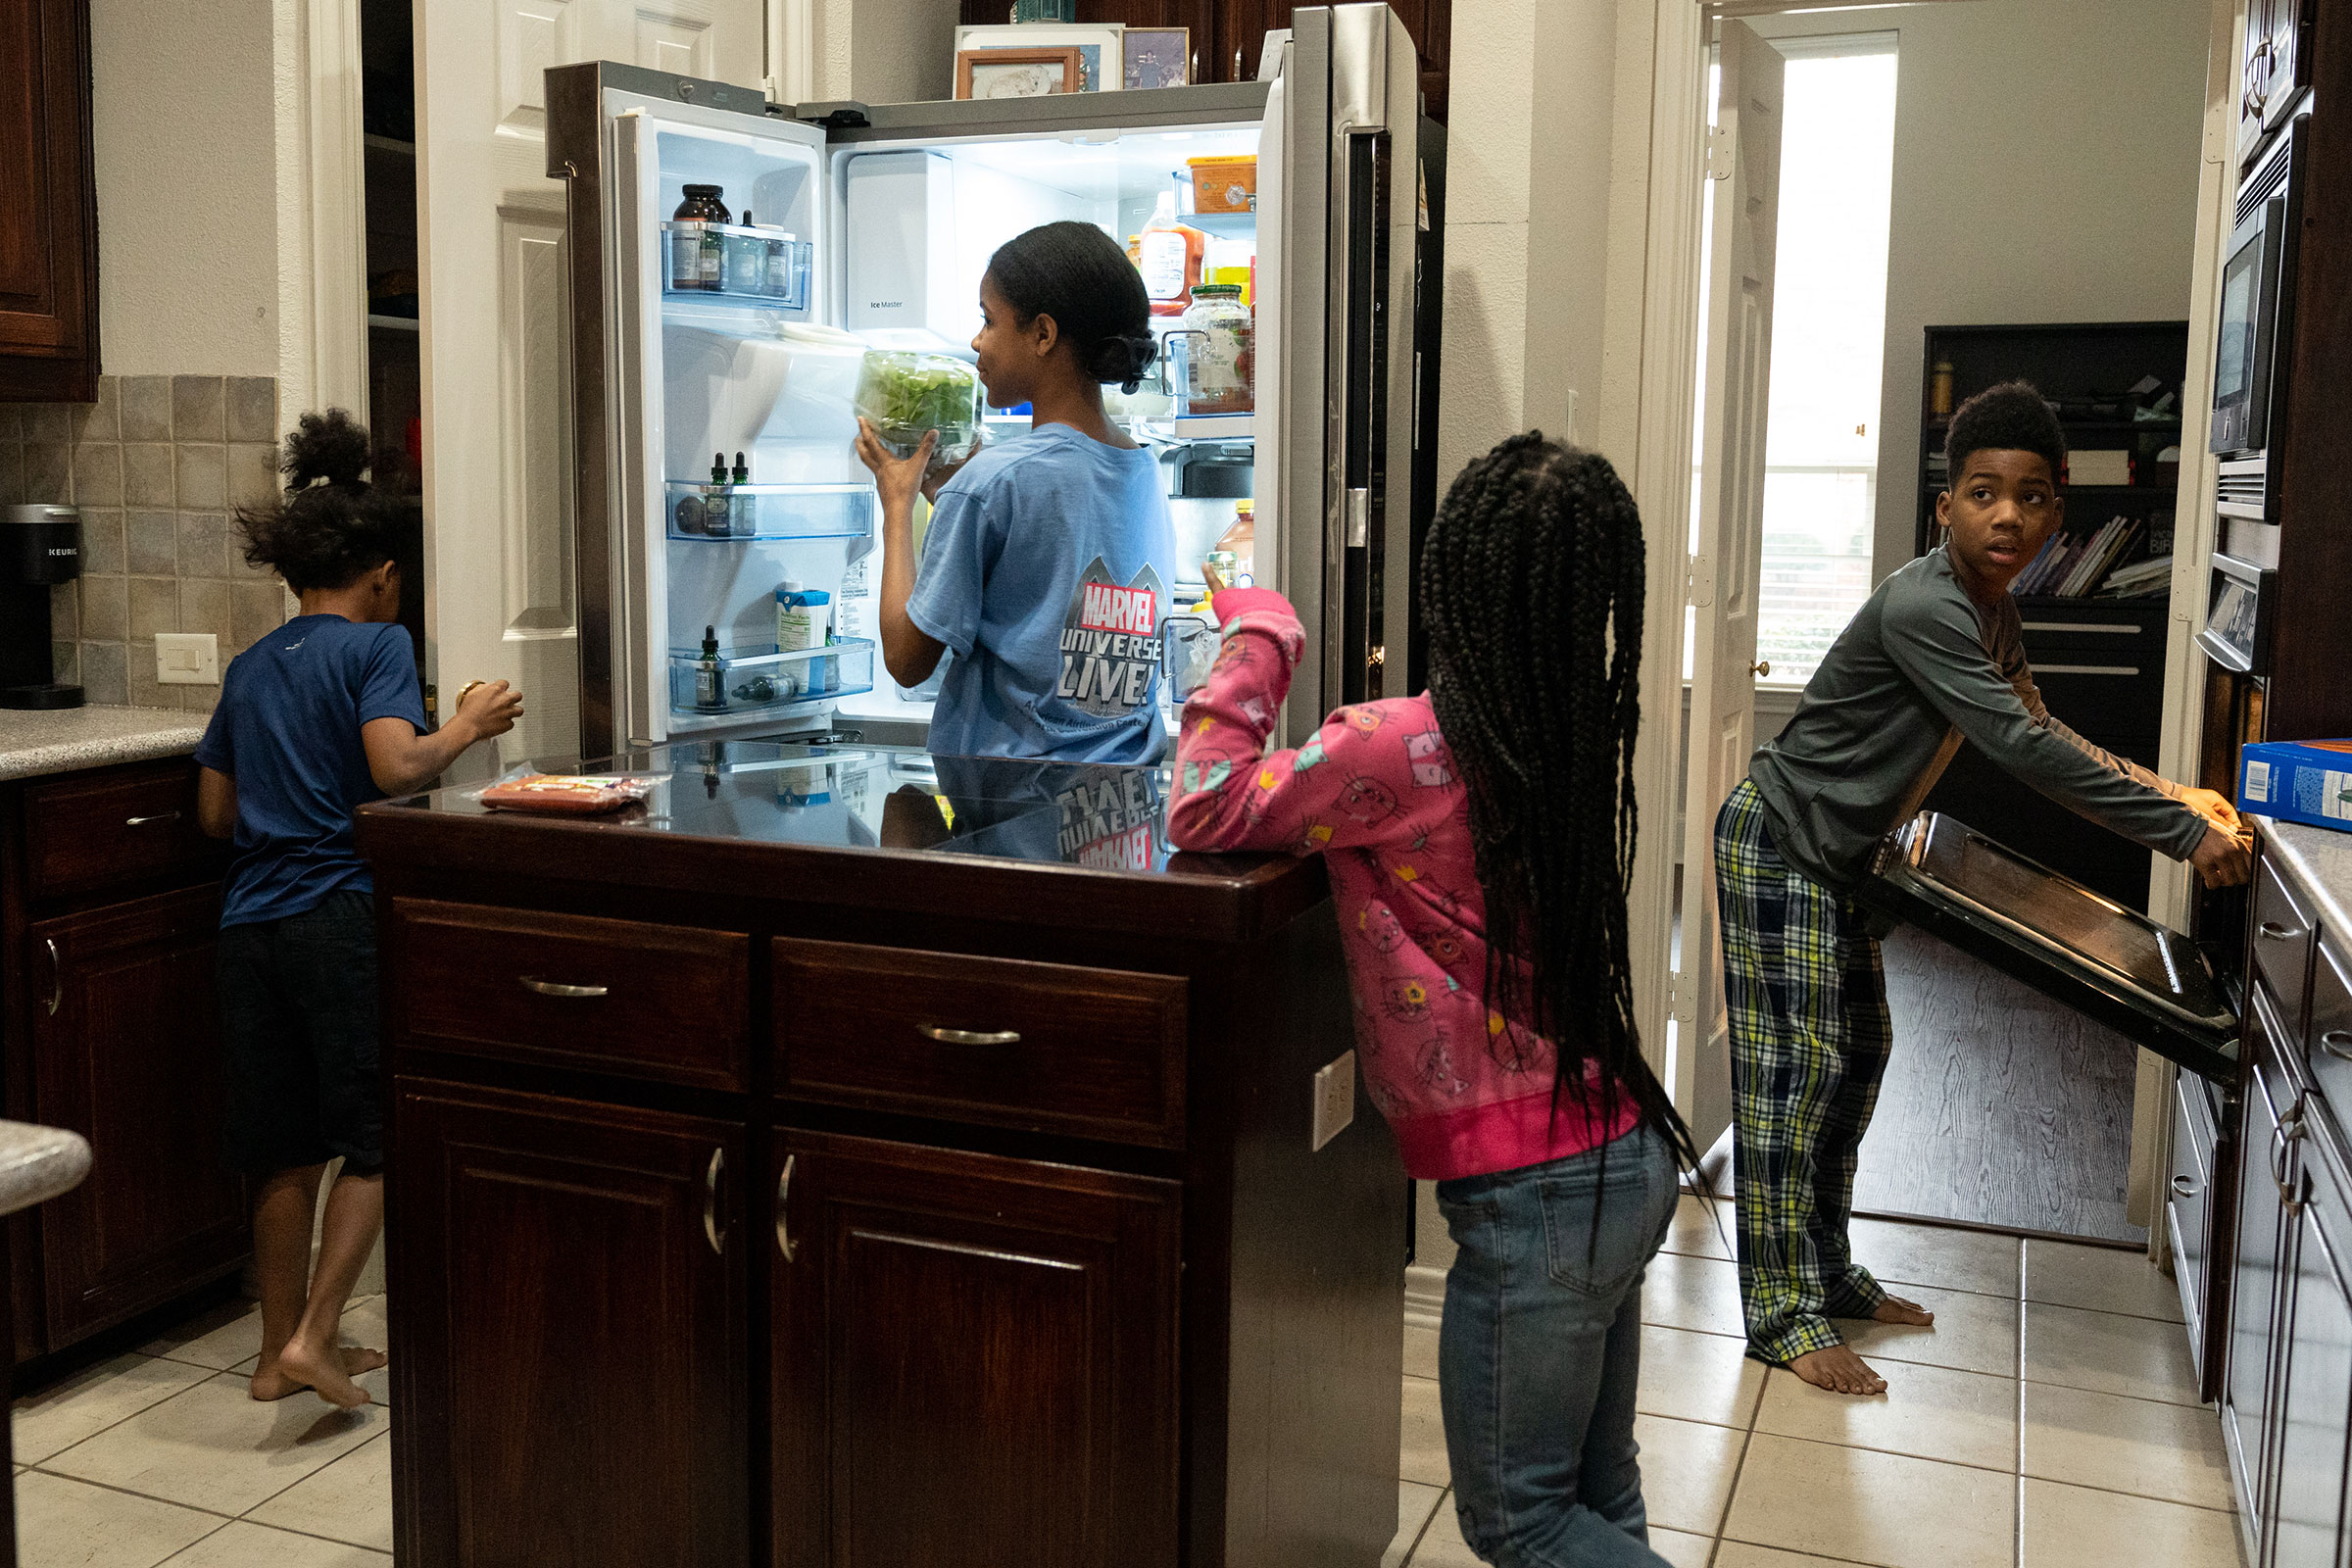 Four of the Thomas siblings make lunch after school lessons in the family's kitchen. (Ilana Panich-Linsman for TIME)